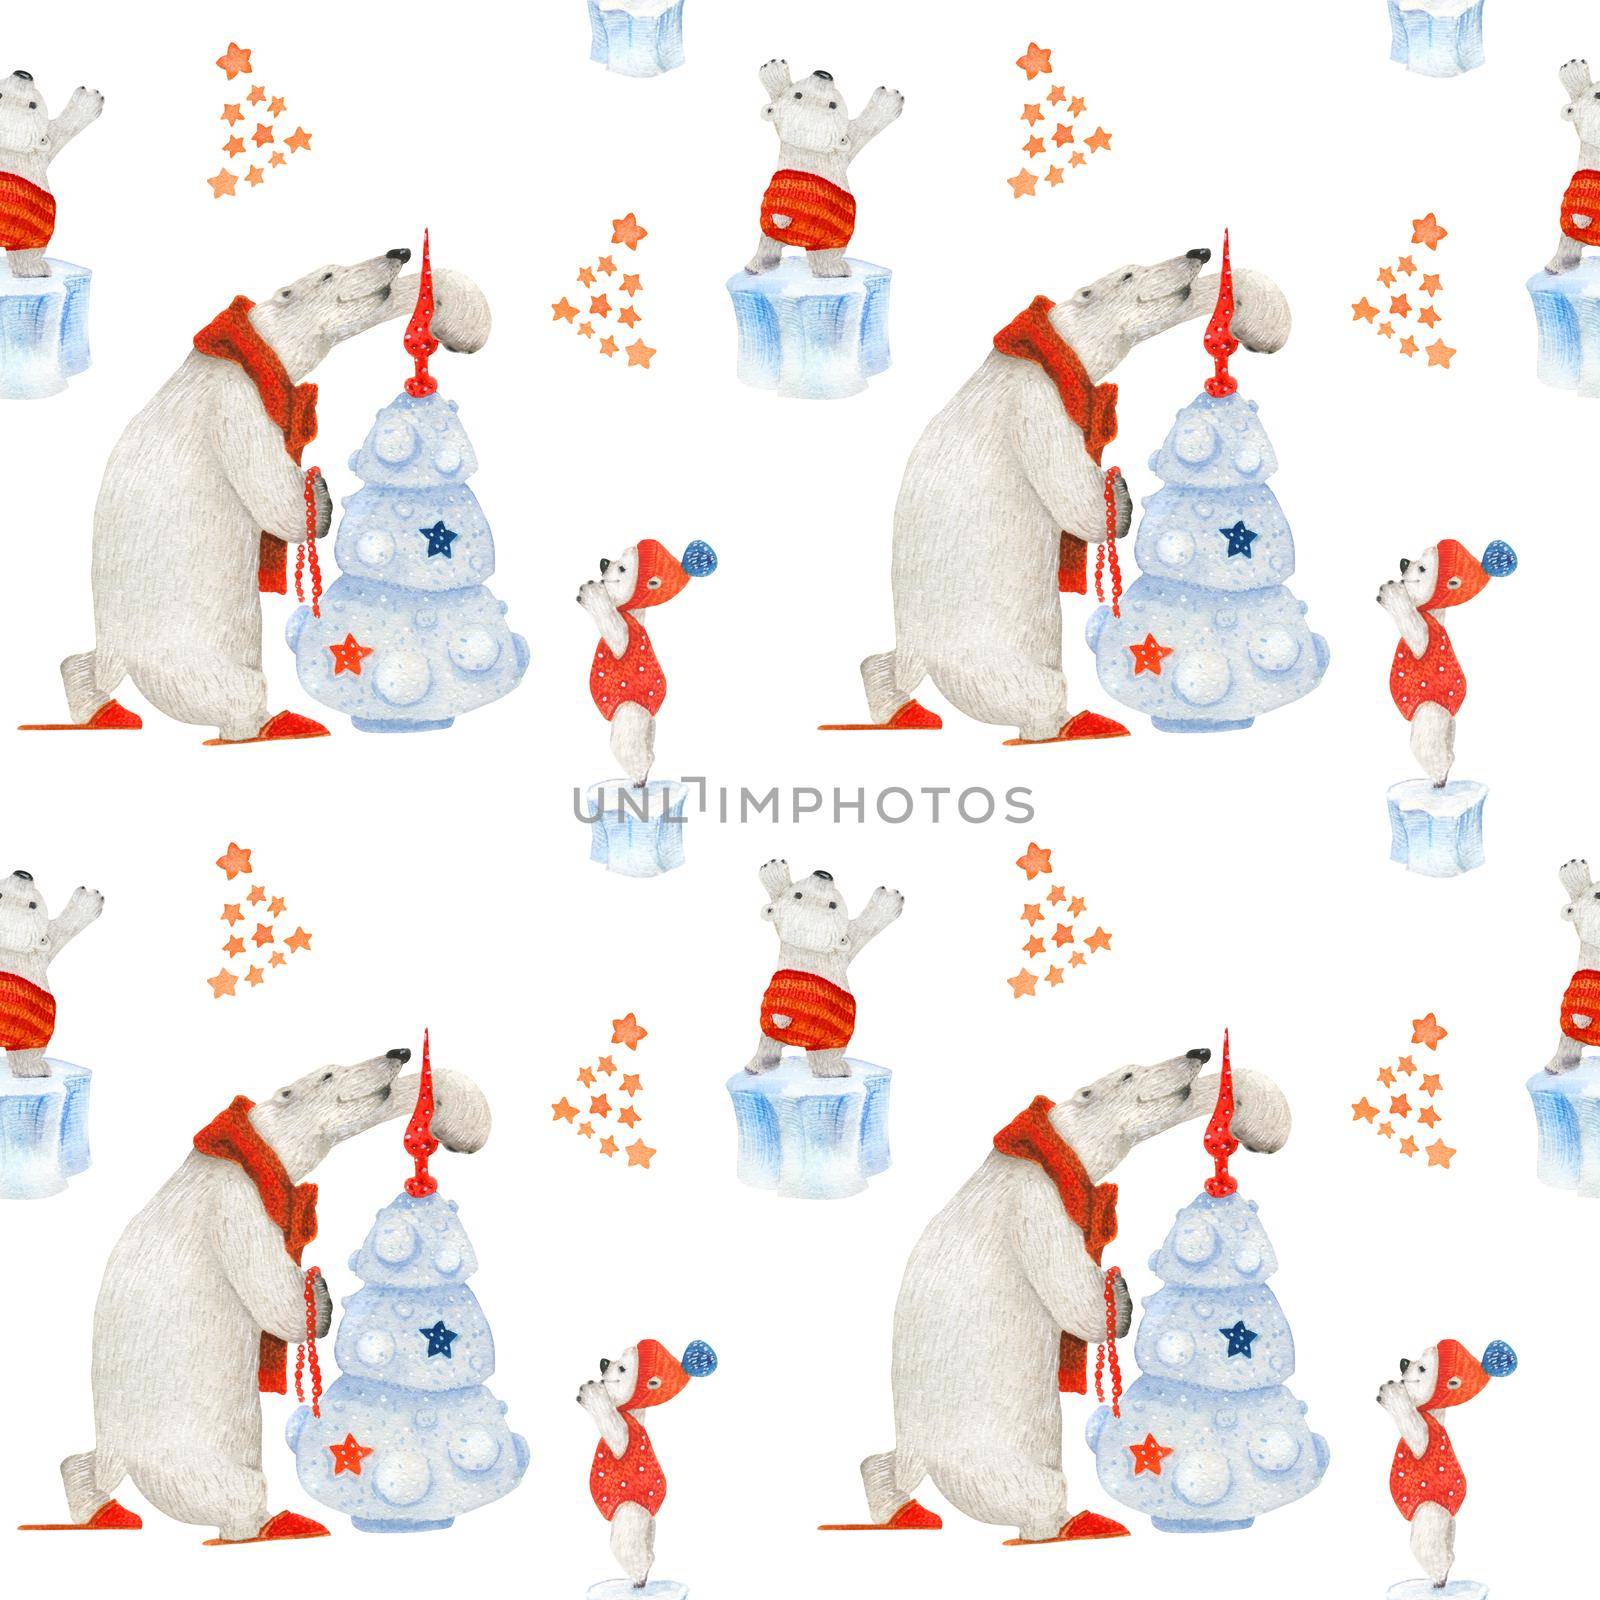 Polar bears decorating new year tree. Watercolor seamless patterns for textile, wrapping paper and any tiled design. White background, clipping path uncluded